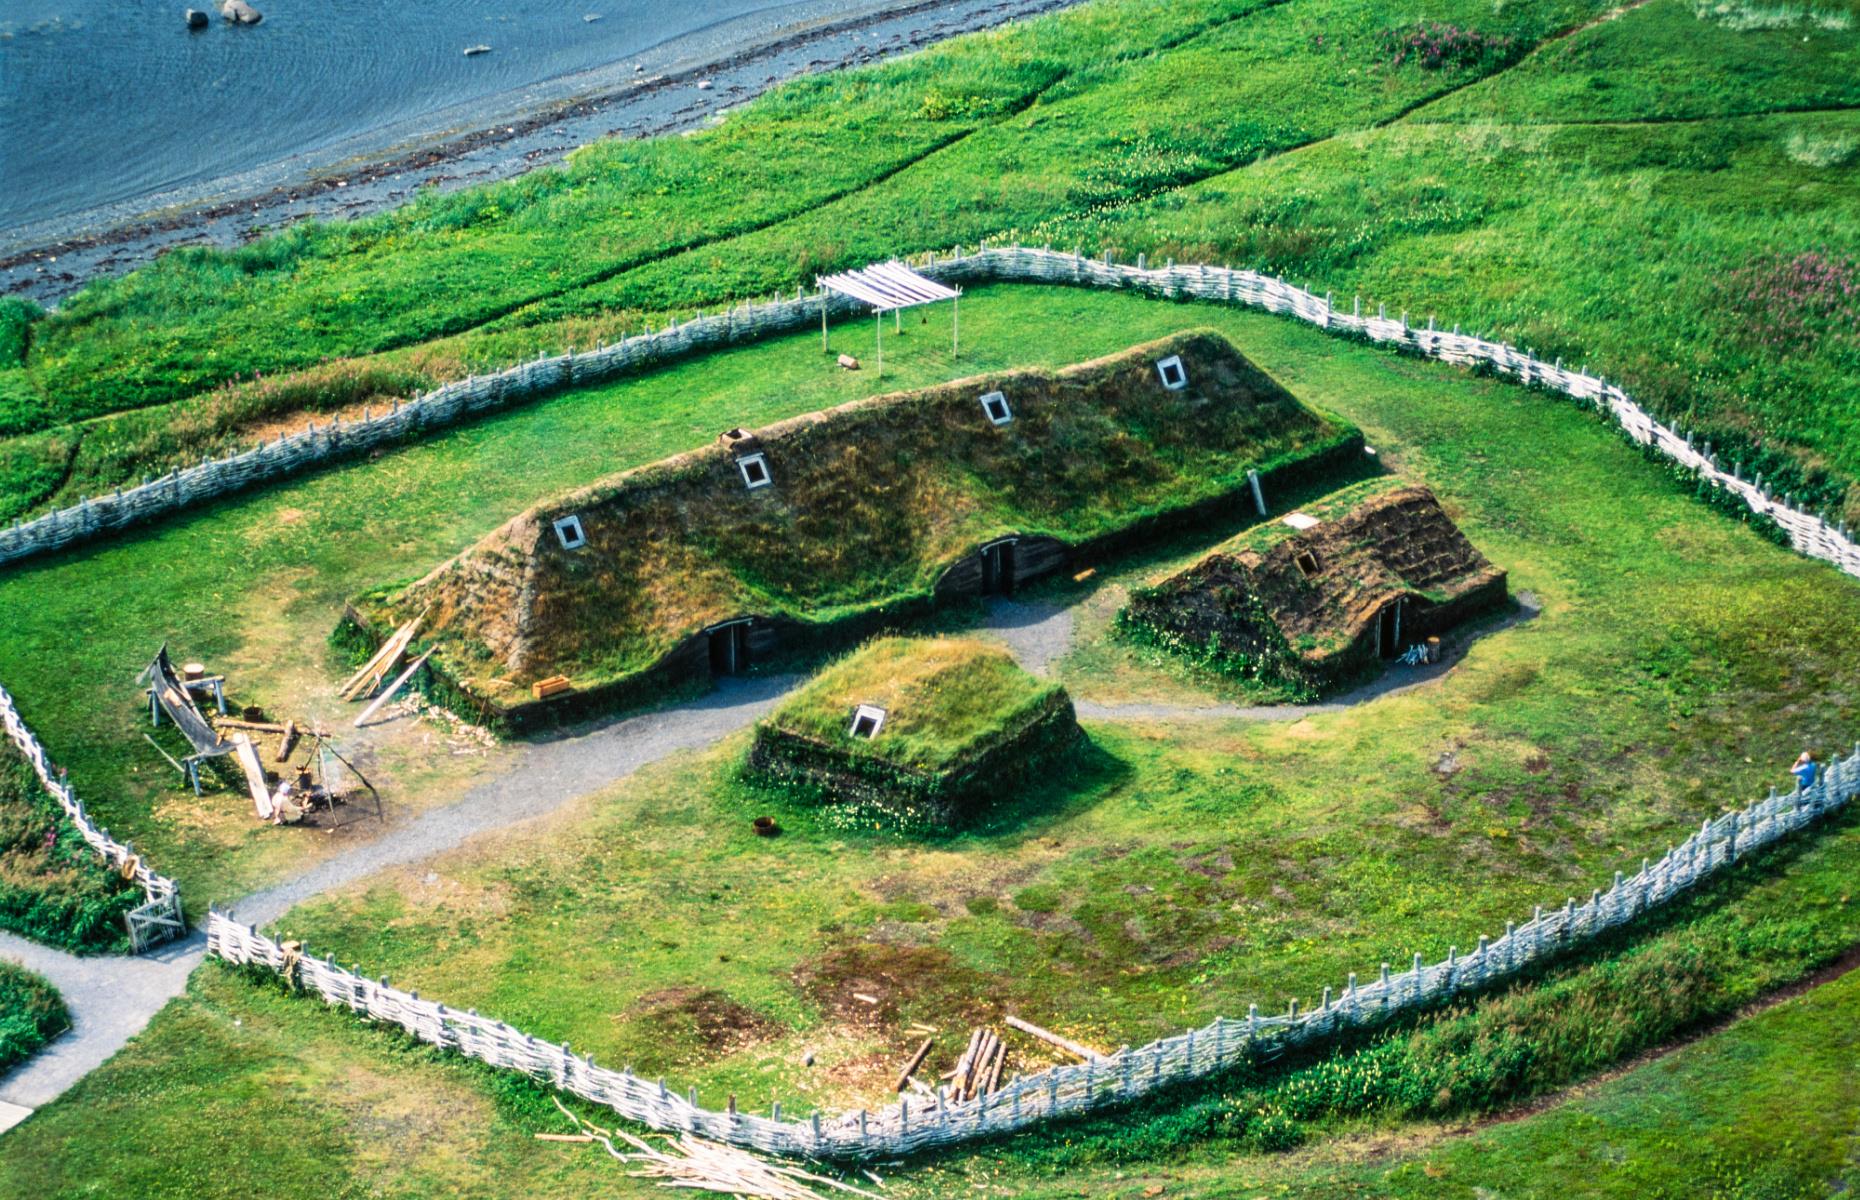 <p>If Gros Morne isn’t enough, the Viking Trail continues northwards to <a href="https://www.pc.gc.ca/en/lhn-nhs/nl/meadows">L’anse aux Meadows National Historic Site,</a> located at the tip of Great Northern Peninsula. The archeological site is the only confirmed Norse encampment in all of North America, and its artefacts are estimated to be over 1,000 years old. Today the site features a recreated base camp and costumed interpreters as well as original artefacts.</p>